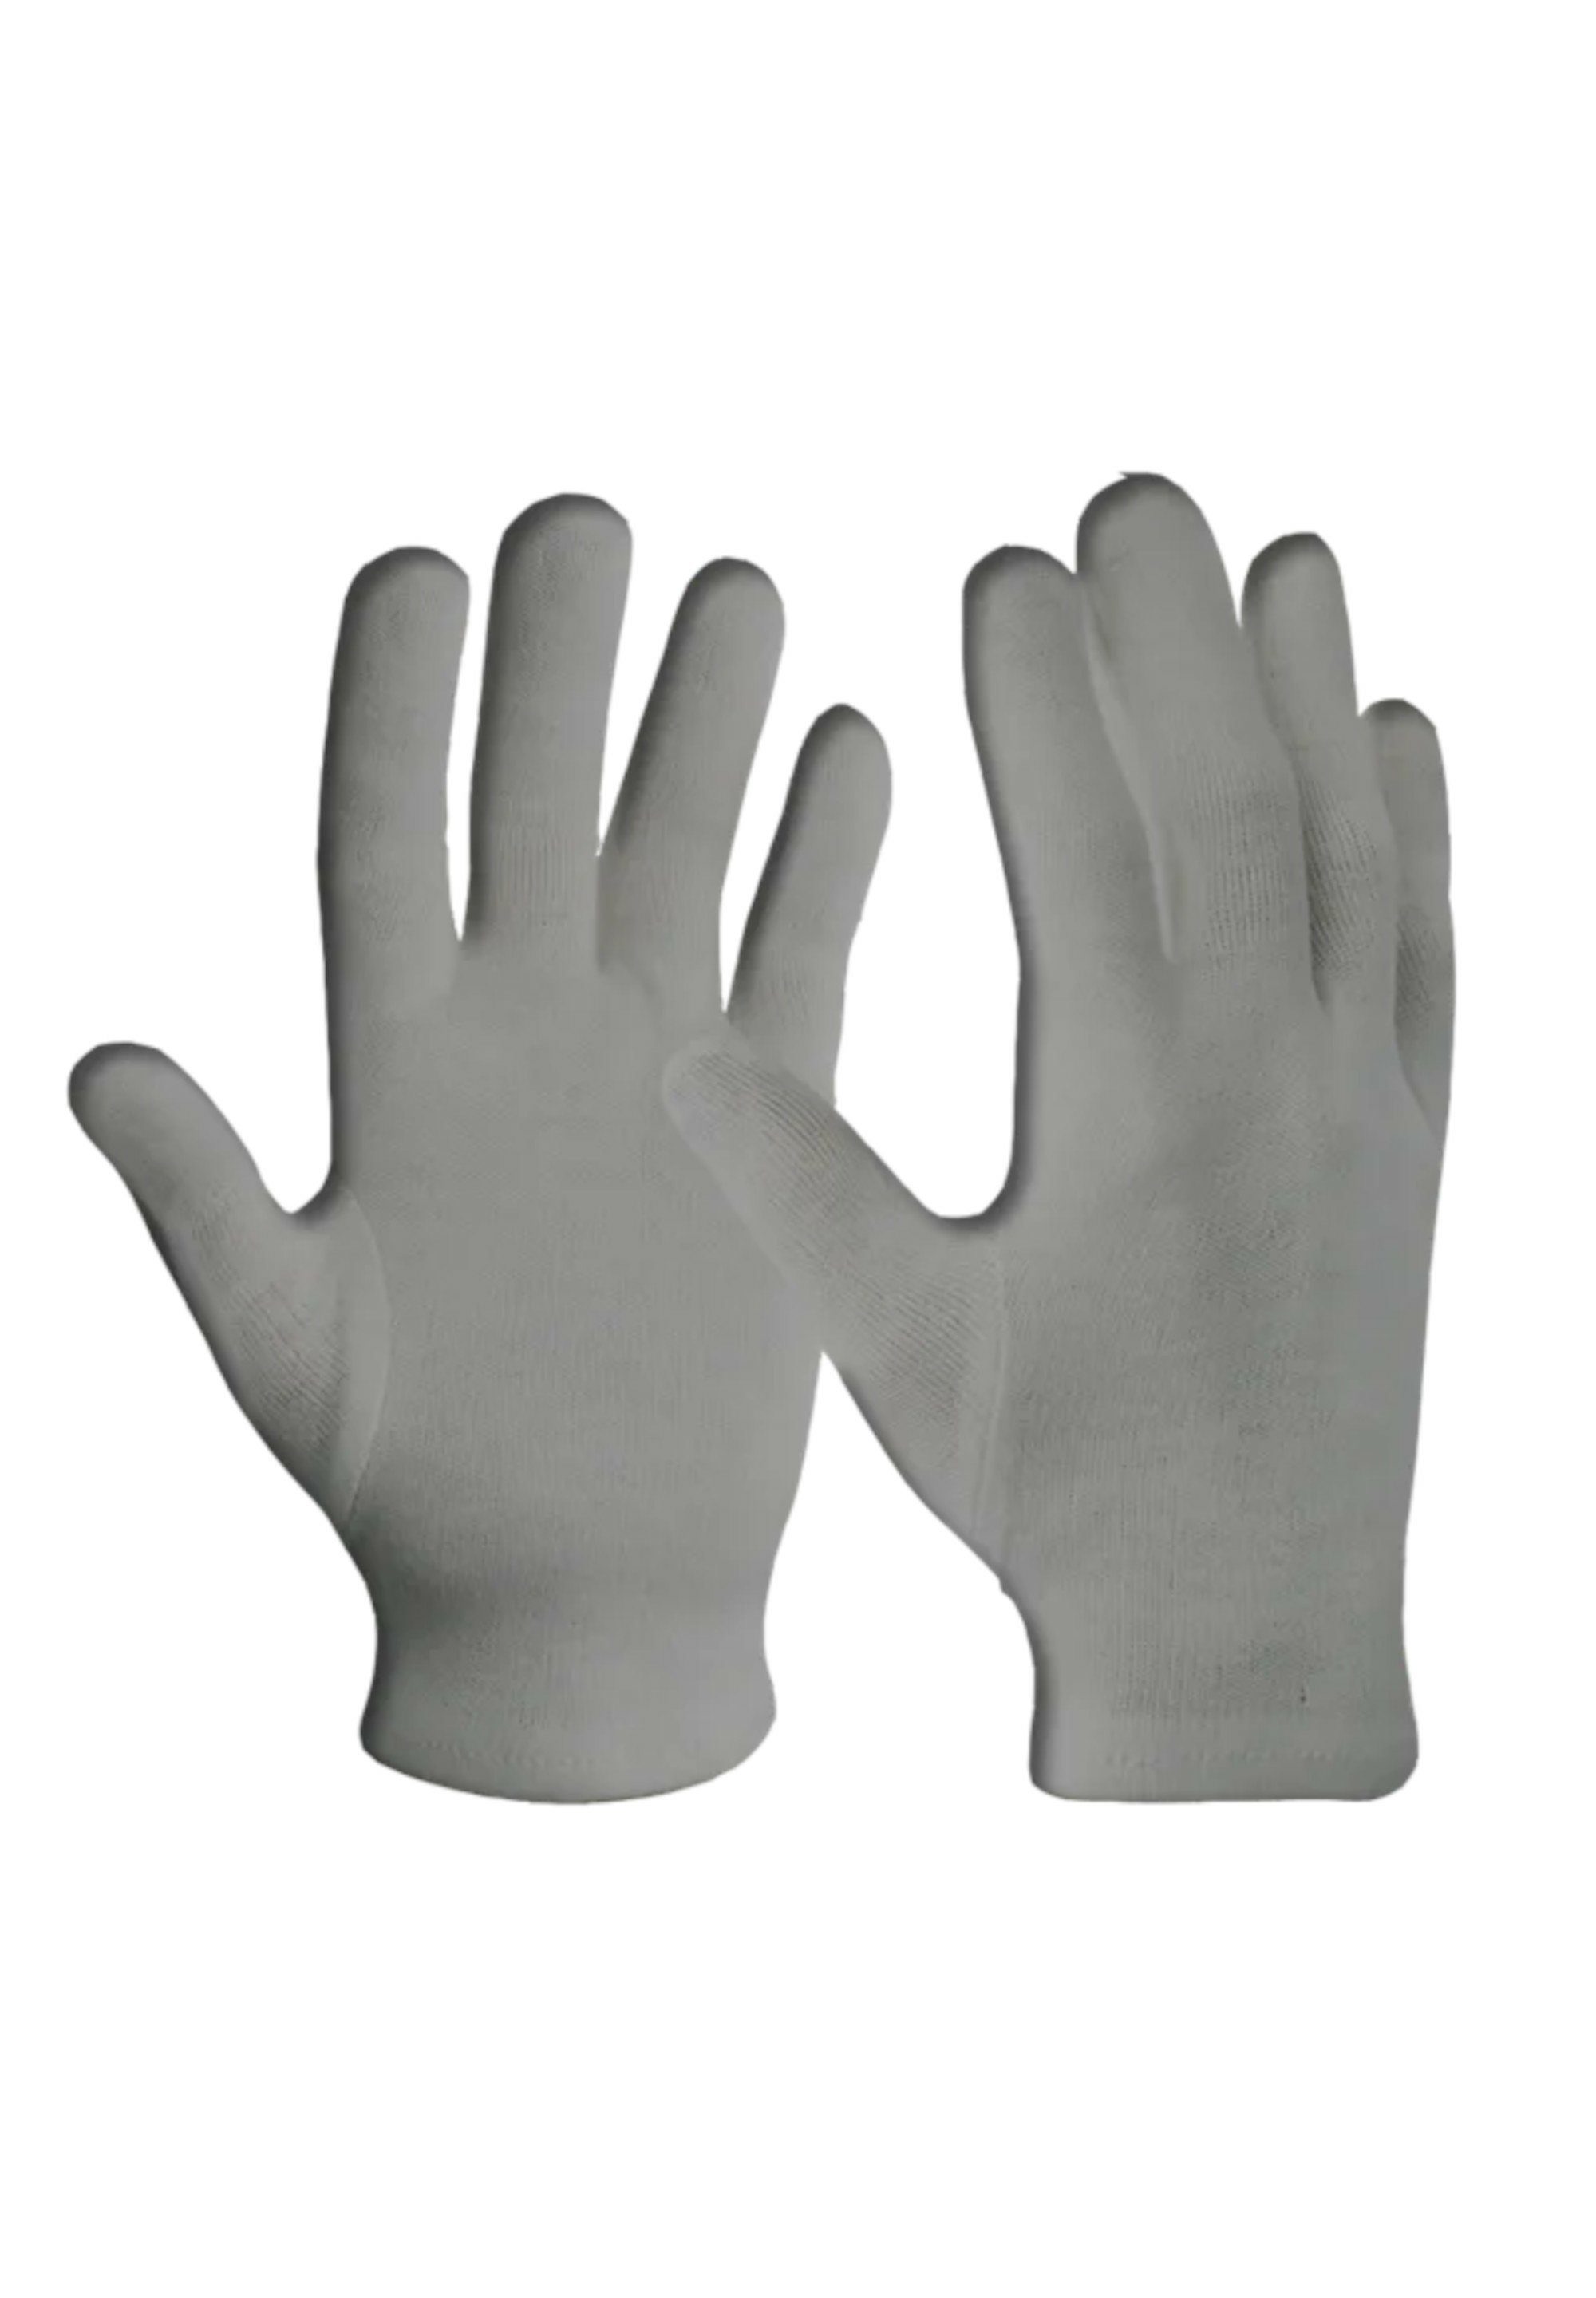 Zanier Multisporthandschuhe ANTIMICROBIAL PROTECTIVE GLOVE We focus on gloves